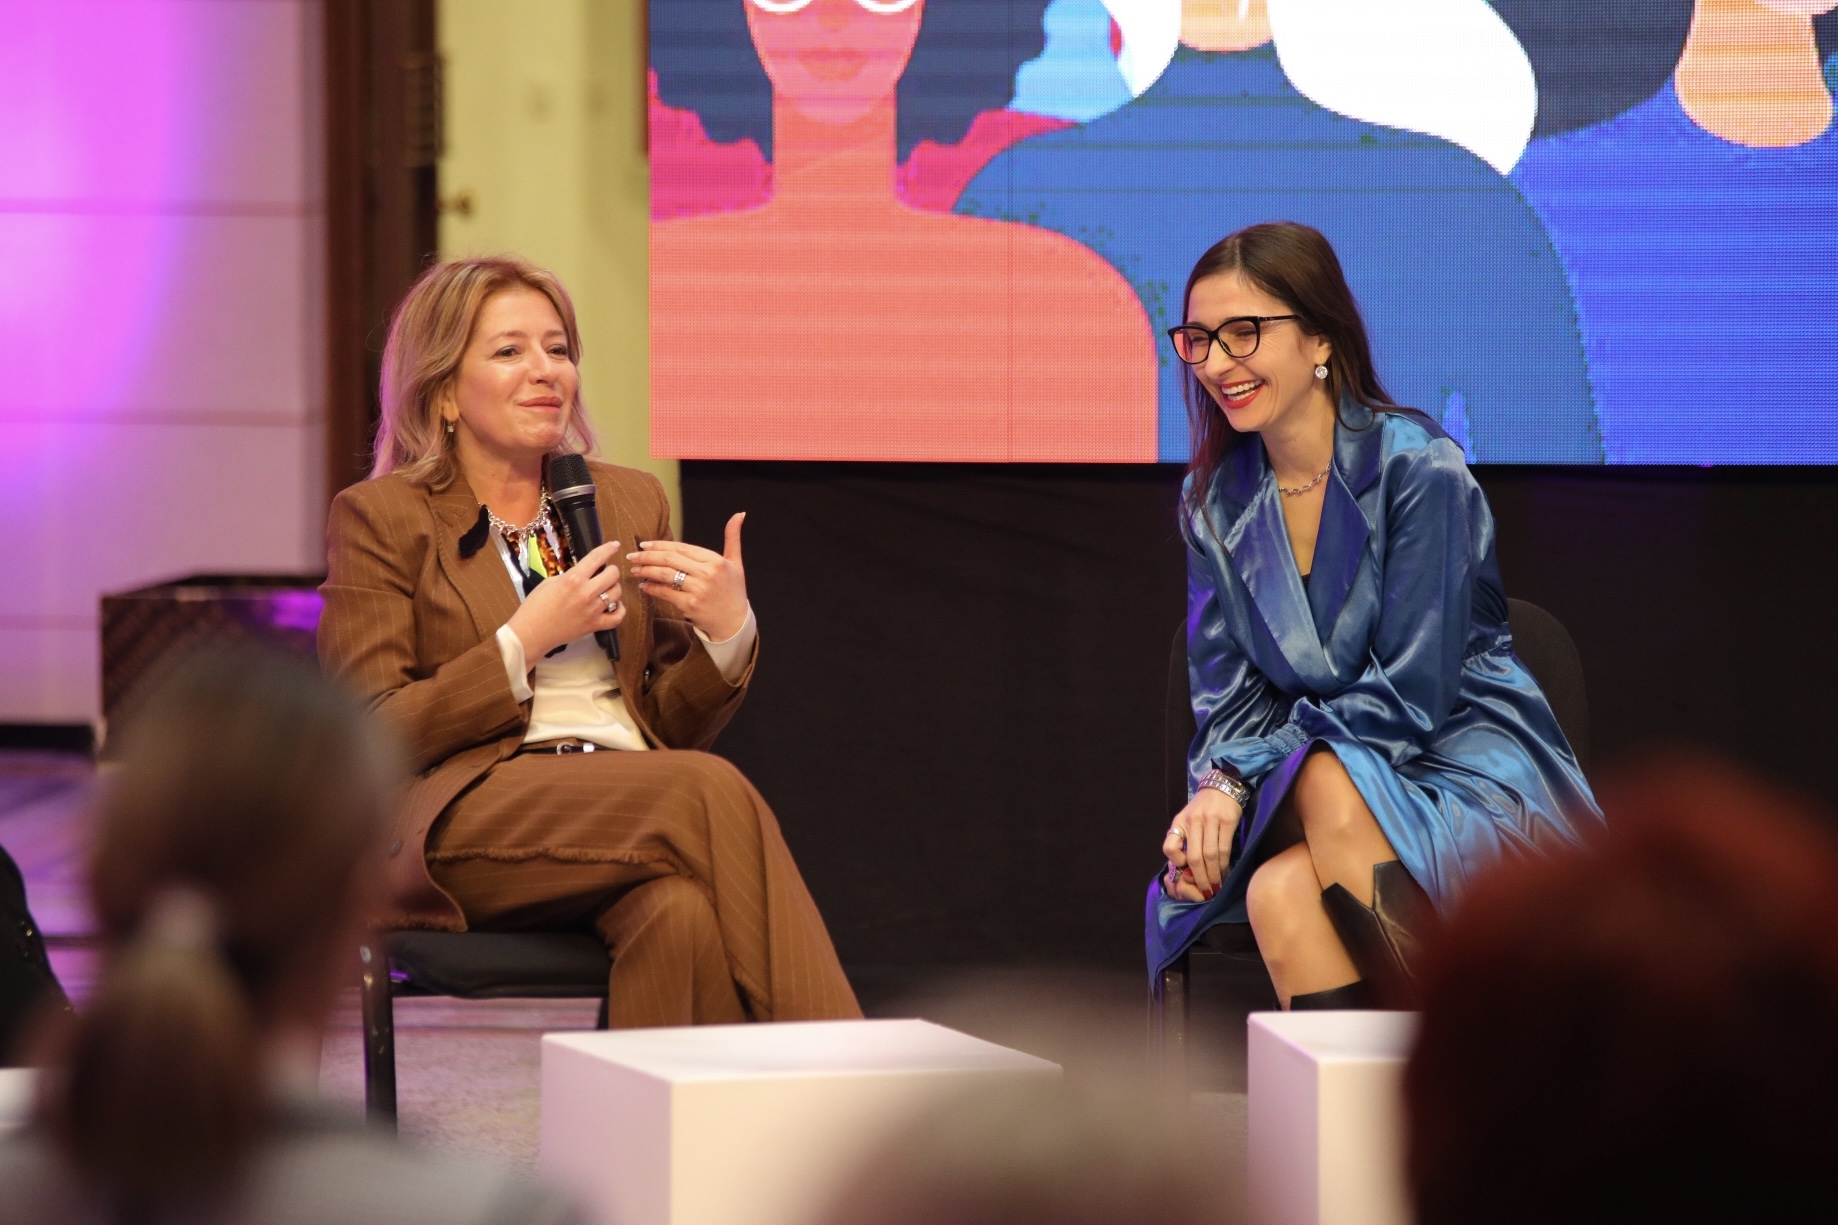 Two women speaking on a stage. One is using a microphone and the other is listening. Both are smiling.